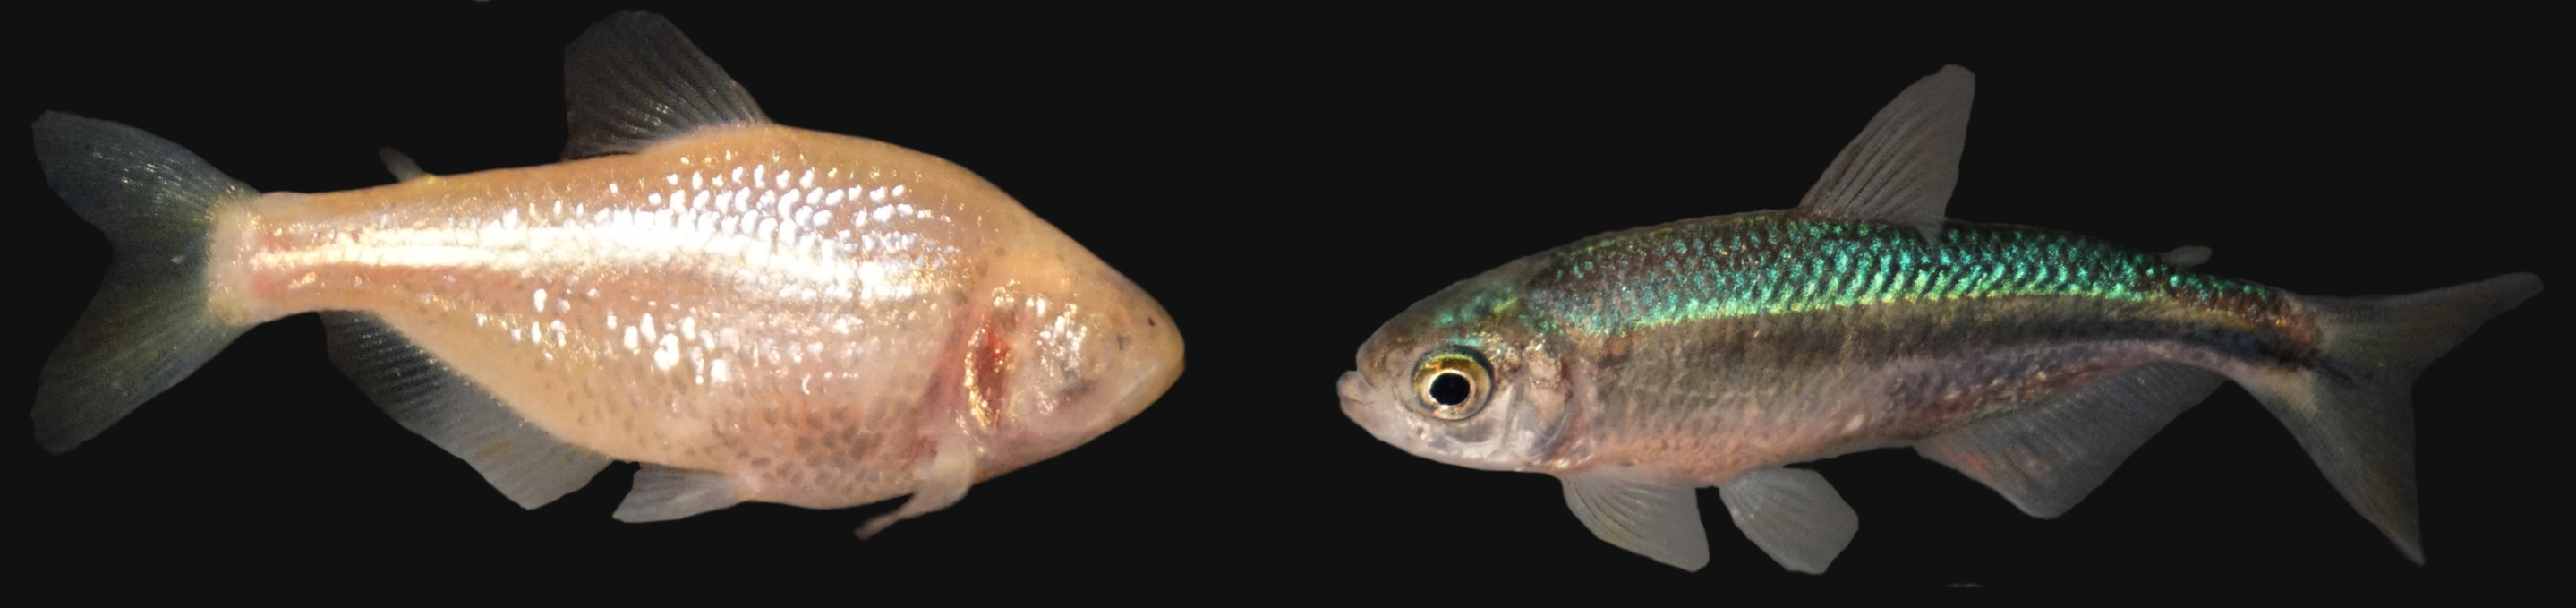 Different forms of *Astyanax mexicanus*. Left: Cave form, which is completely blind and lacks body pigmentation as an adult. Right: An individual from a surface stream for comparison. Photos by [Daniel Castranova, NICHD/NIH](https://www.flickr.com/photos/nihgov/27589386037), [Public Domain](https://creativecommons.org/share-your-work/public-domain/).